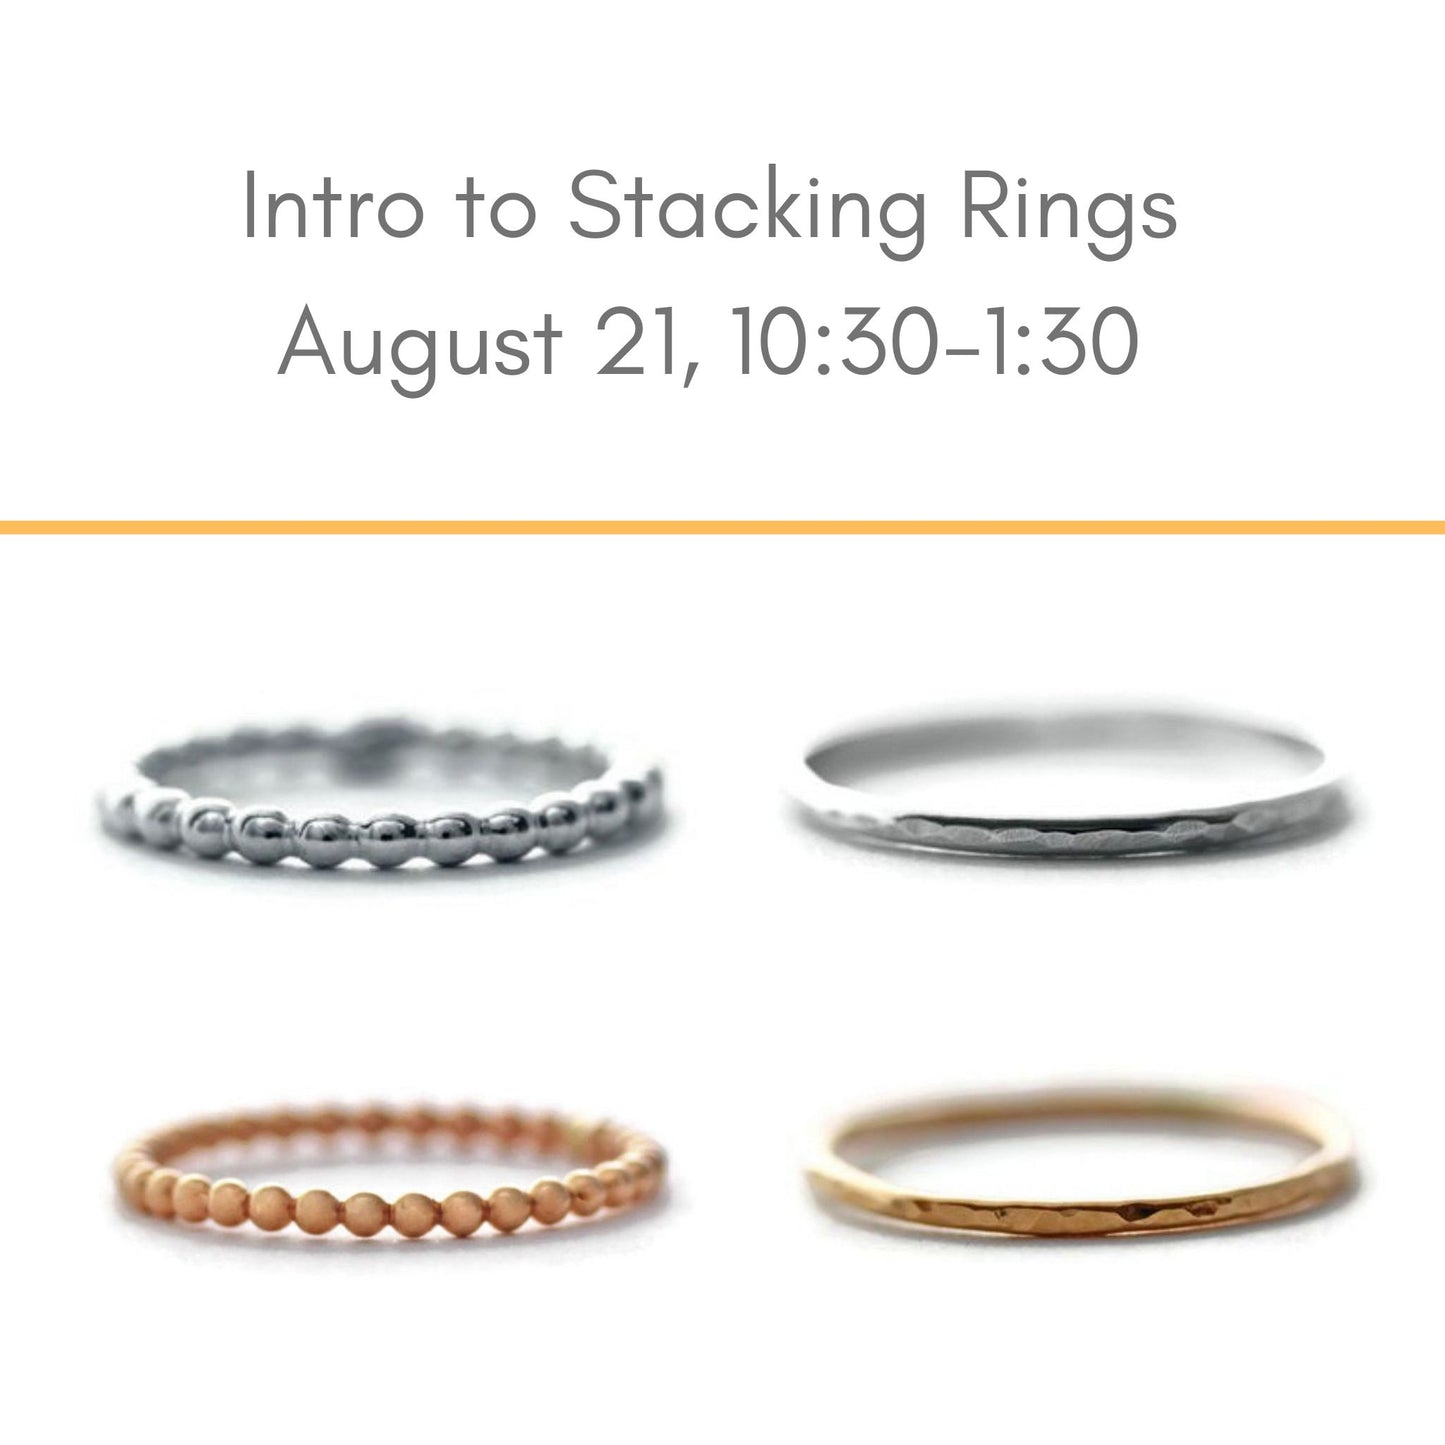 Intro to Stacking Rings August 21 at Silver Peak Studio